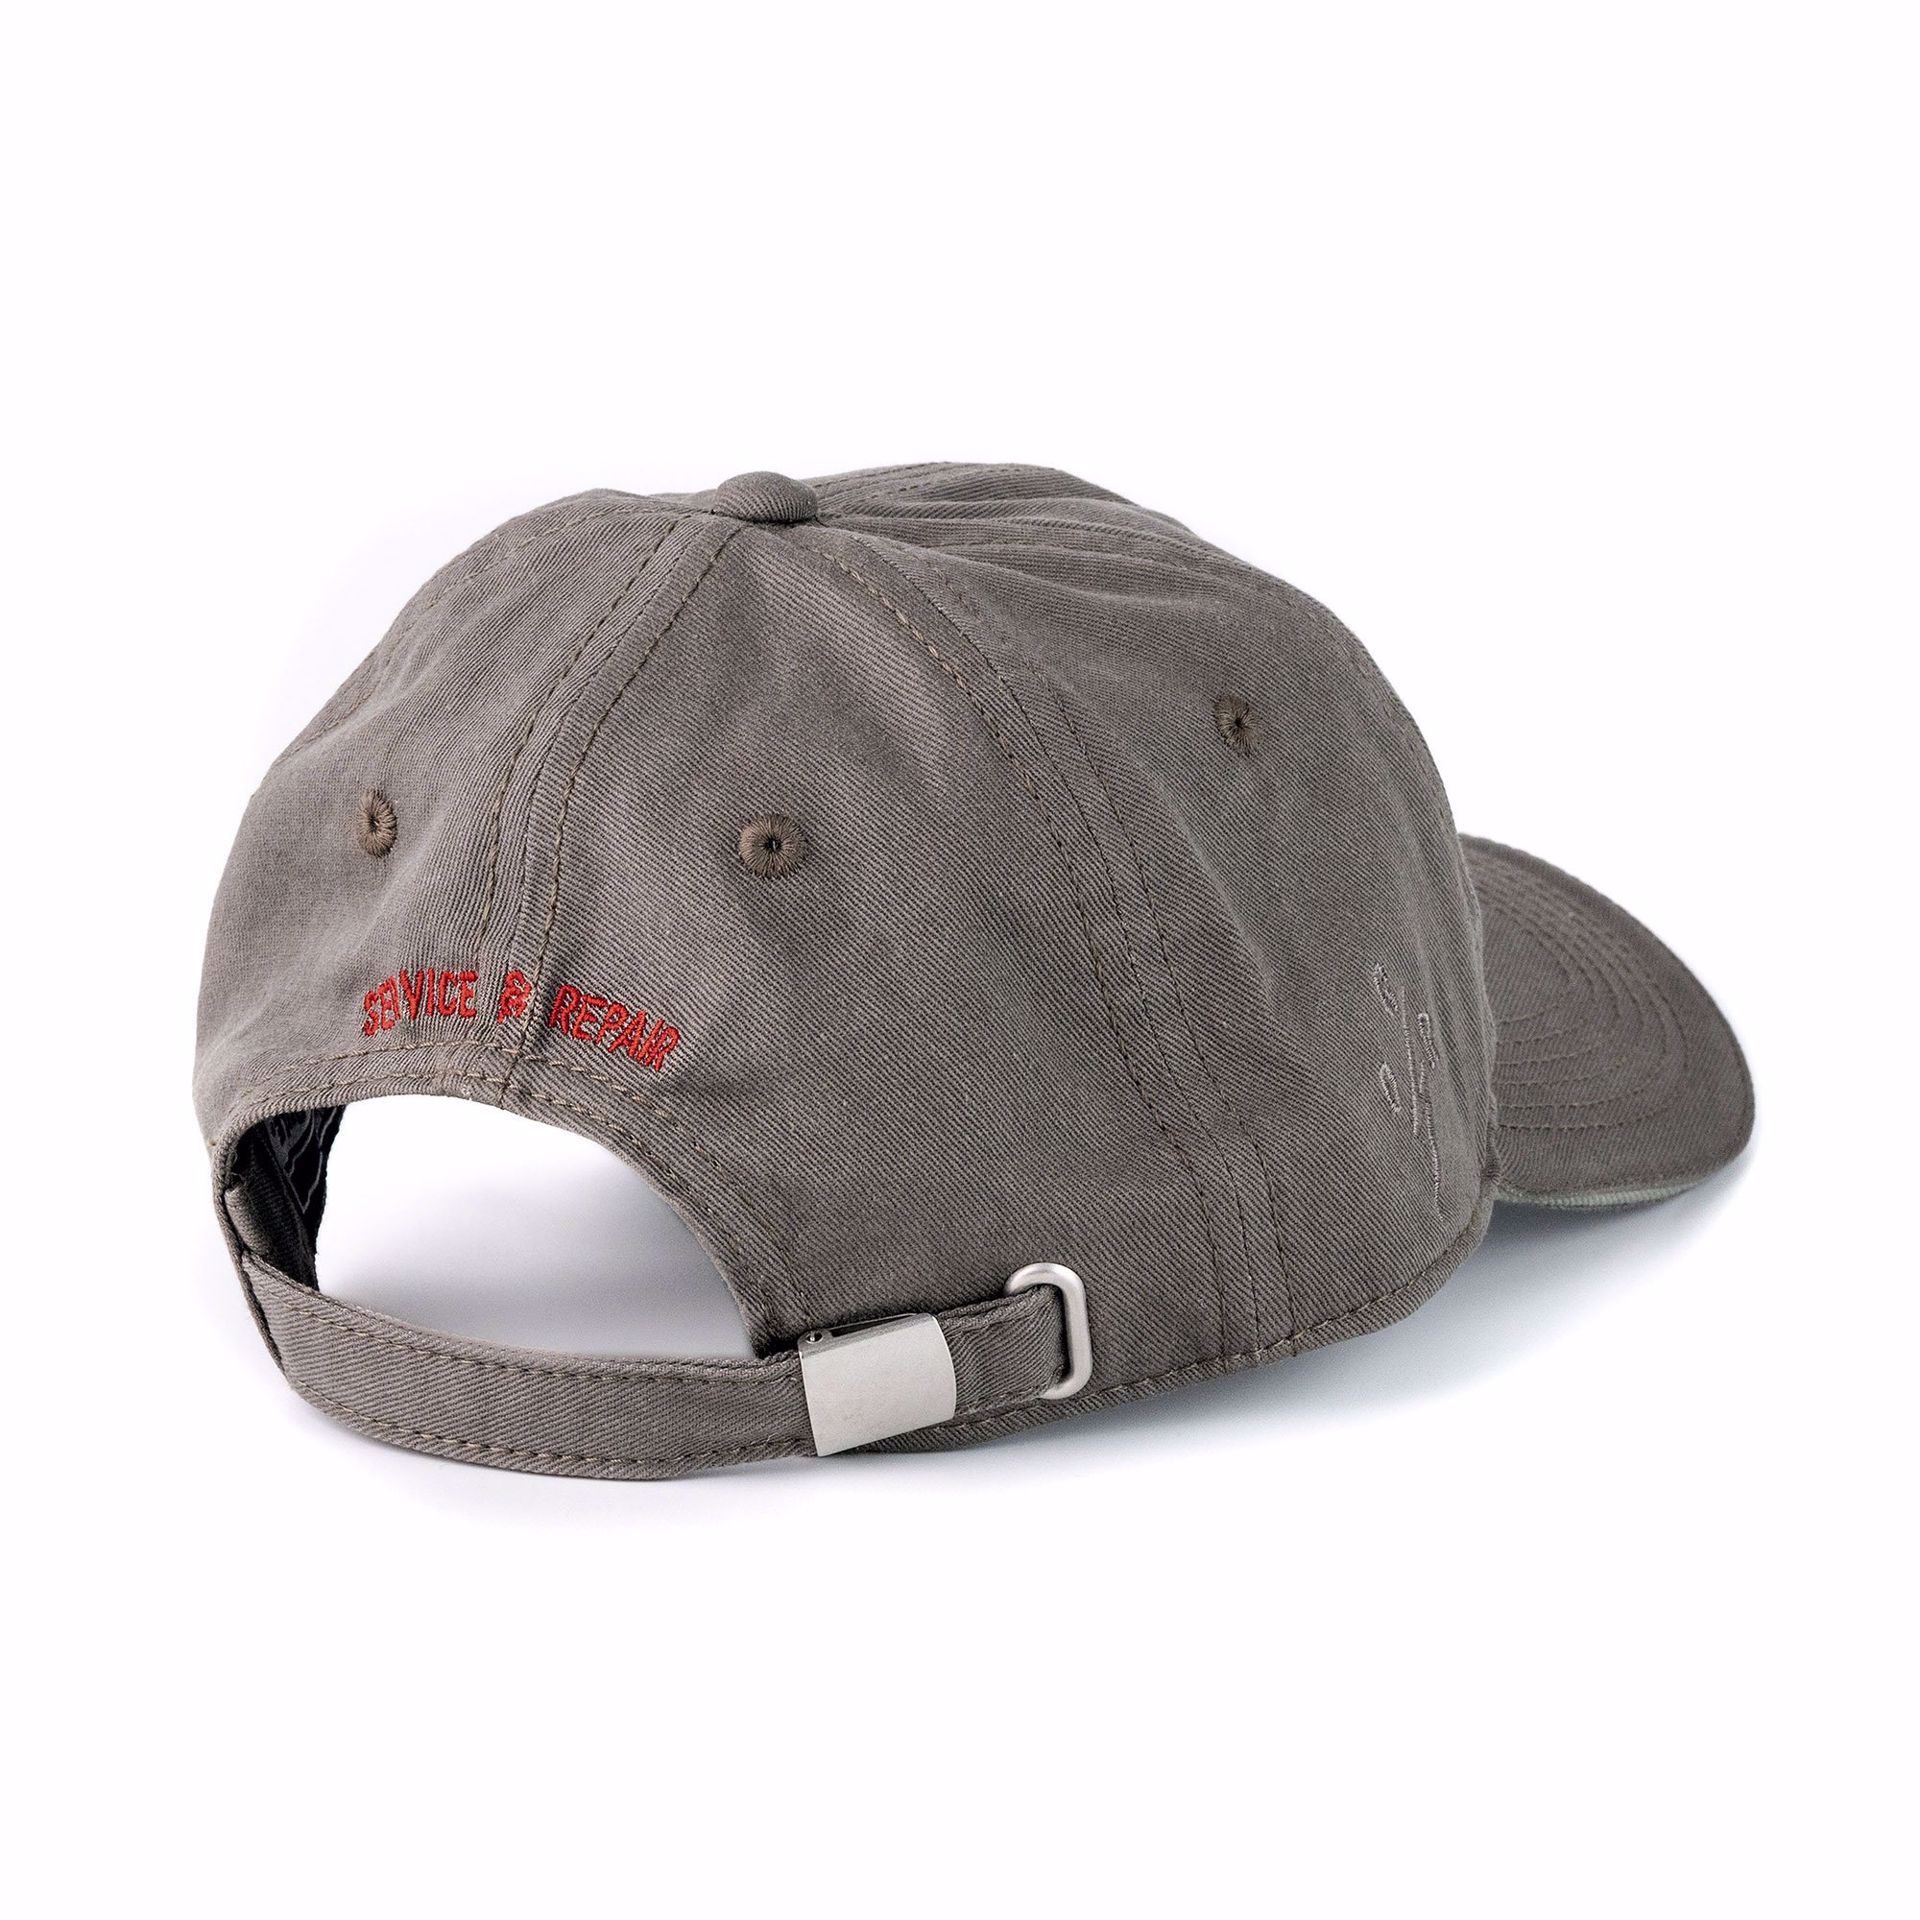 'VINTAGE MOTORCYCLES II' CAP - CHARCOAL. Outer Reef Surf Store